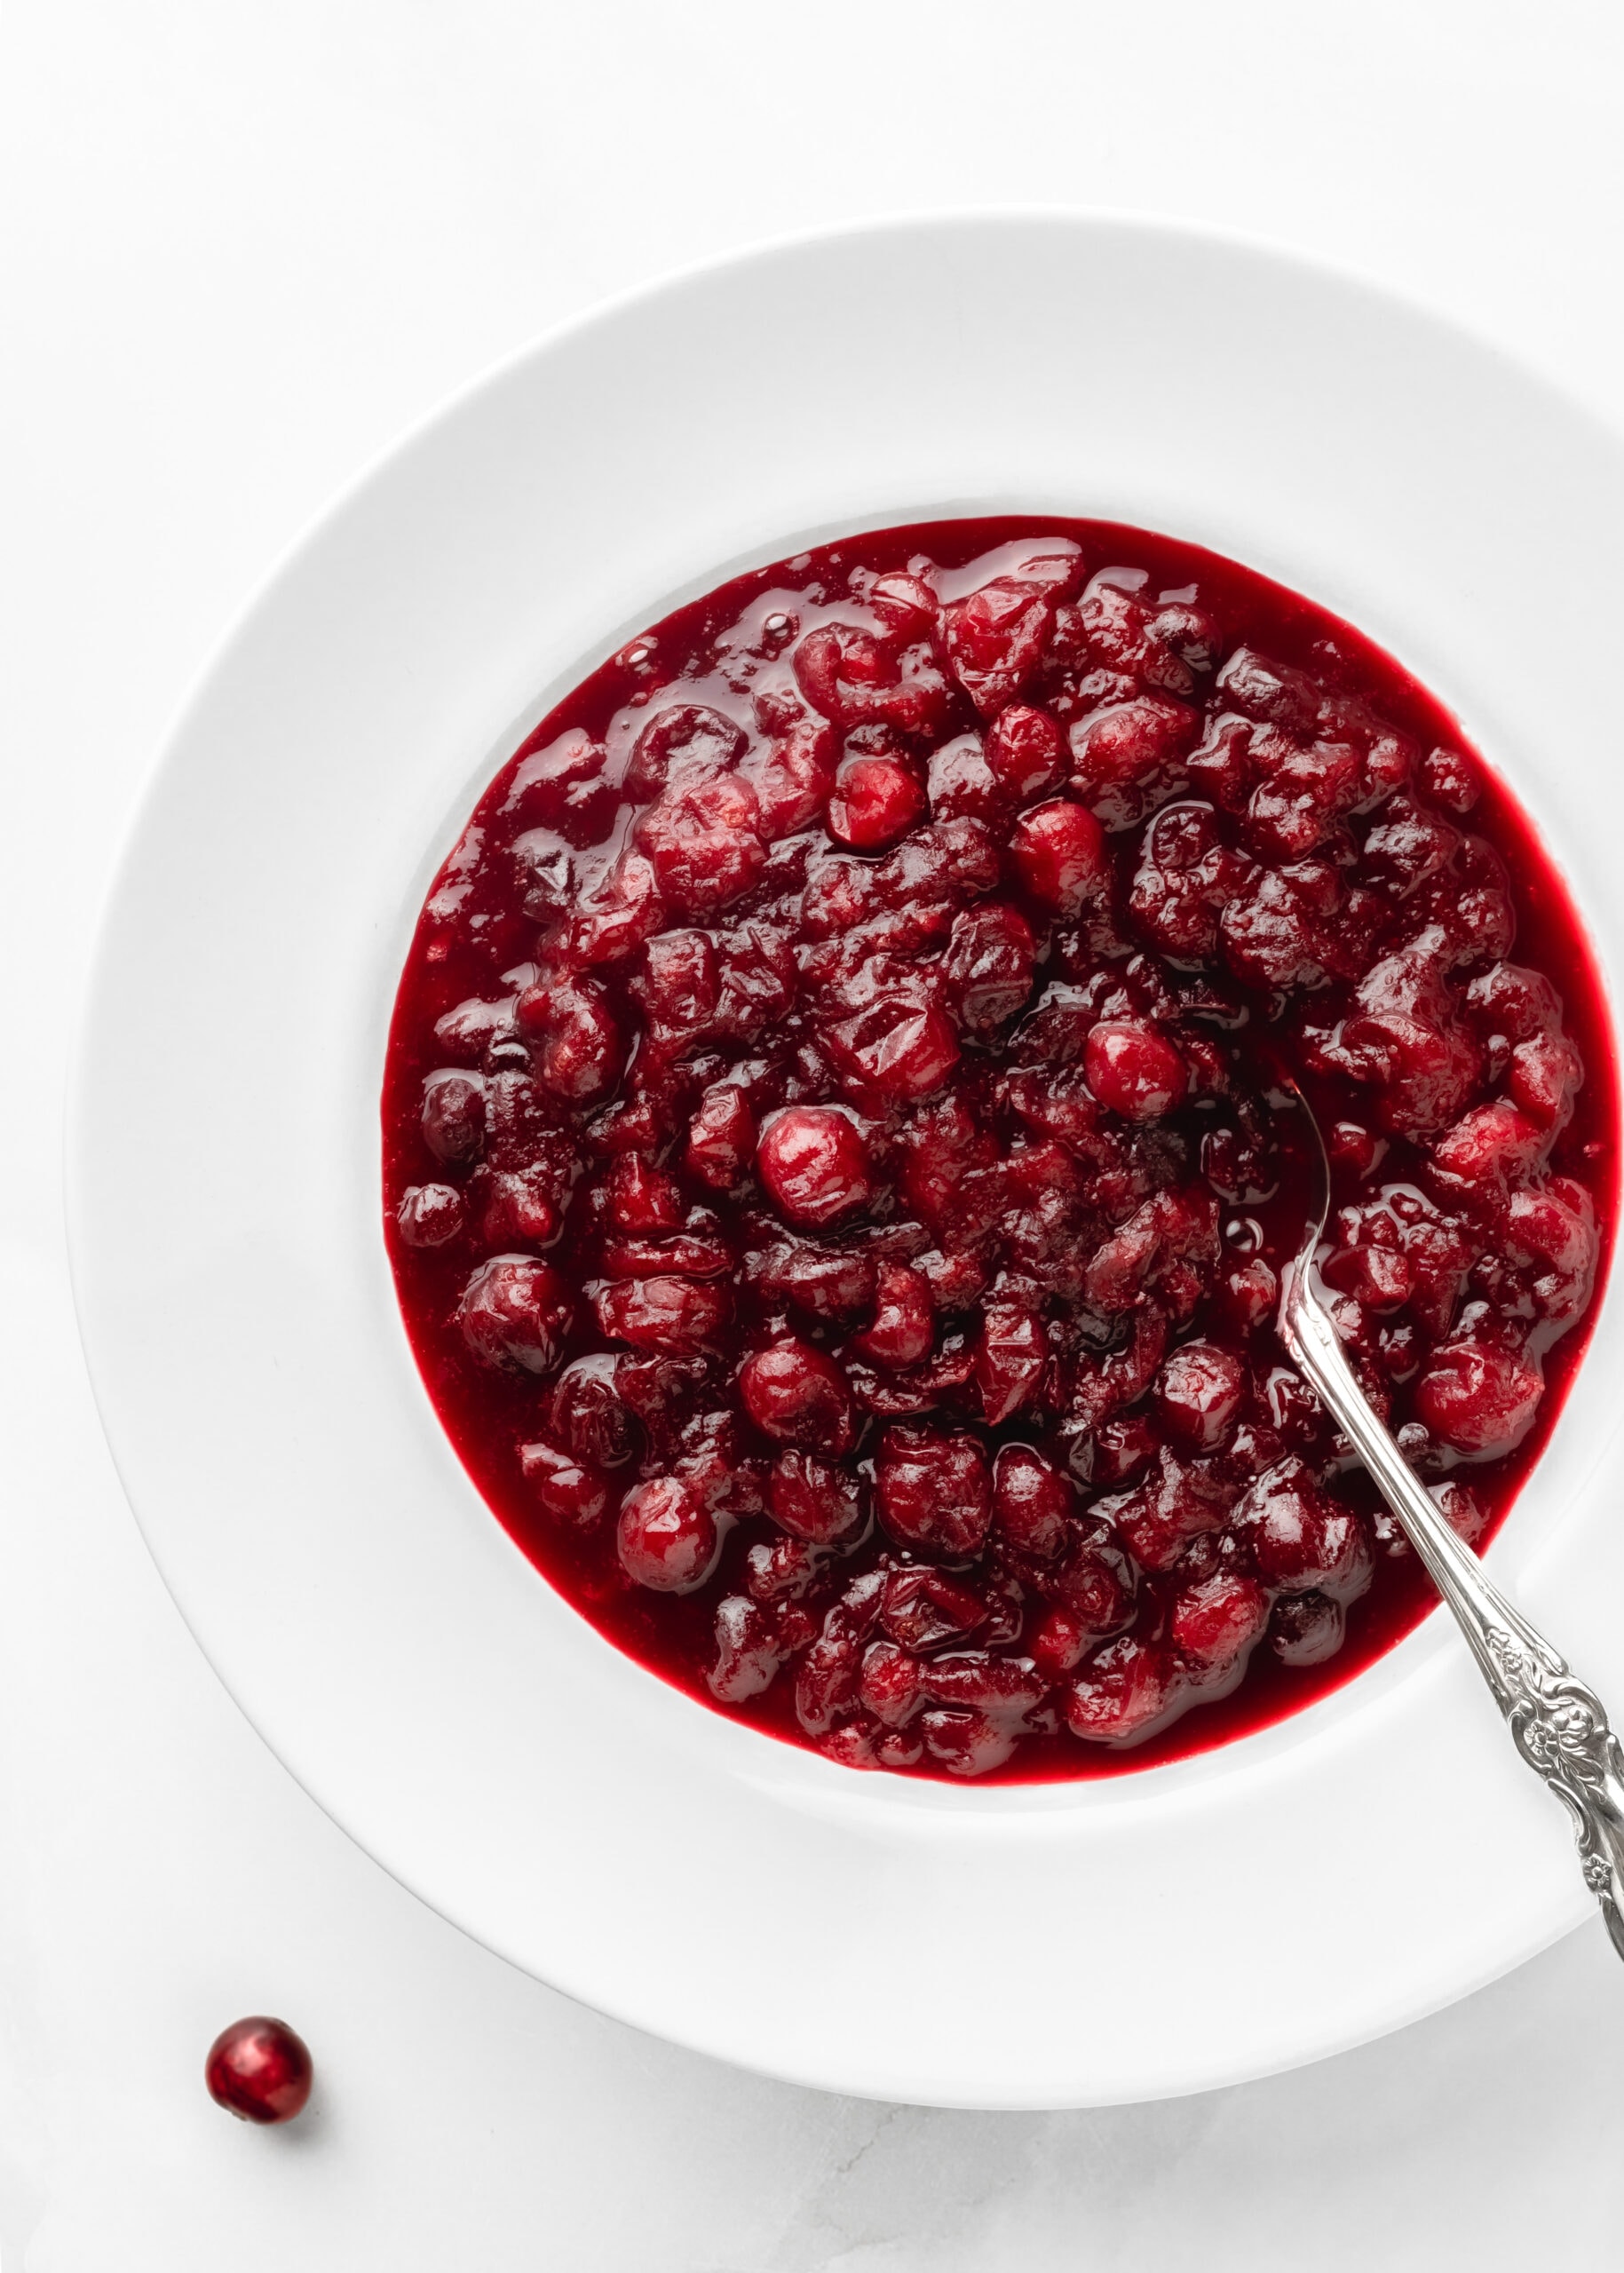 A large white bowl filled with vibrant red cranberry sauce, served with an antique silver spoon placed inside the bowl.